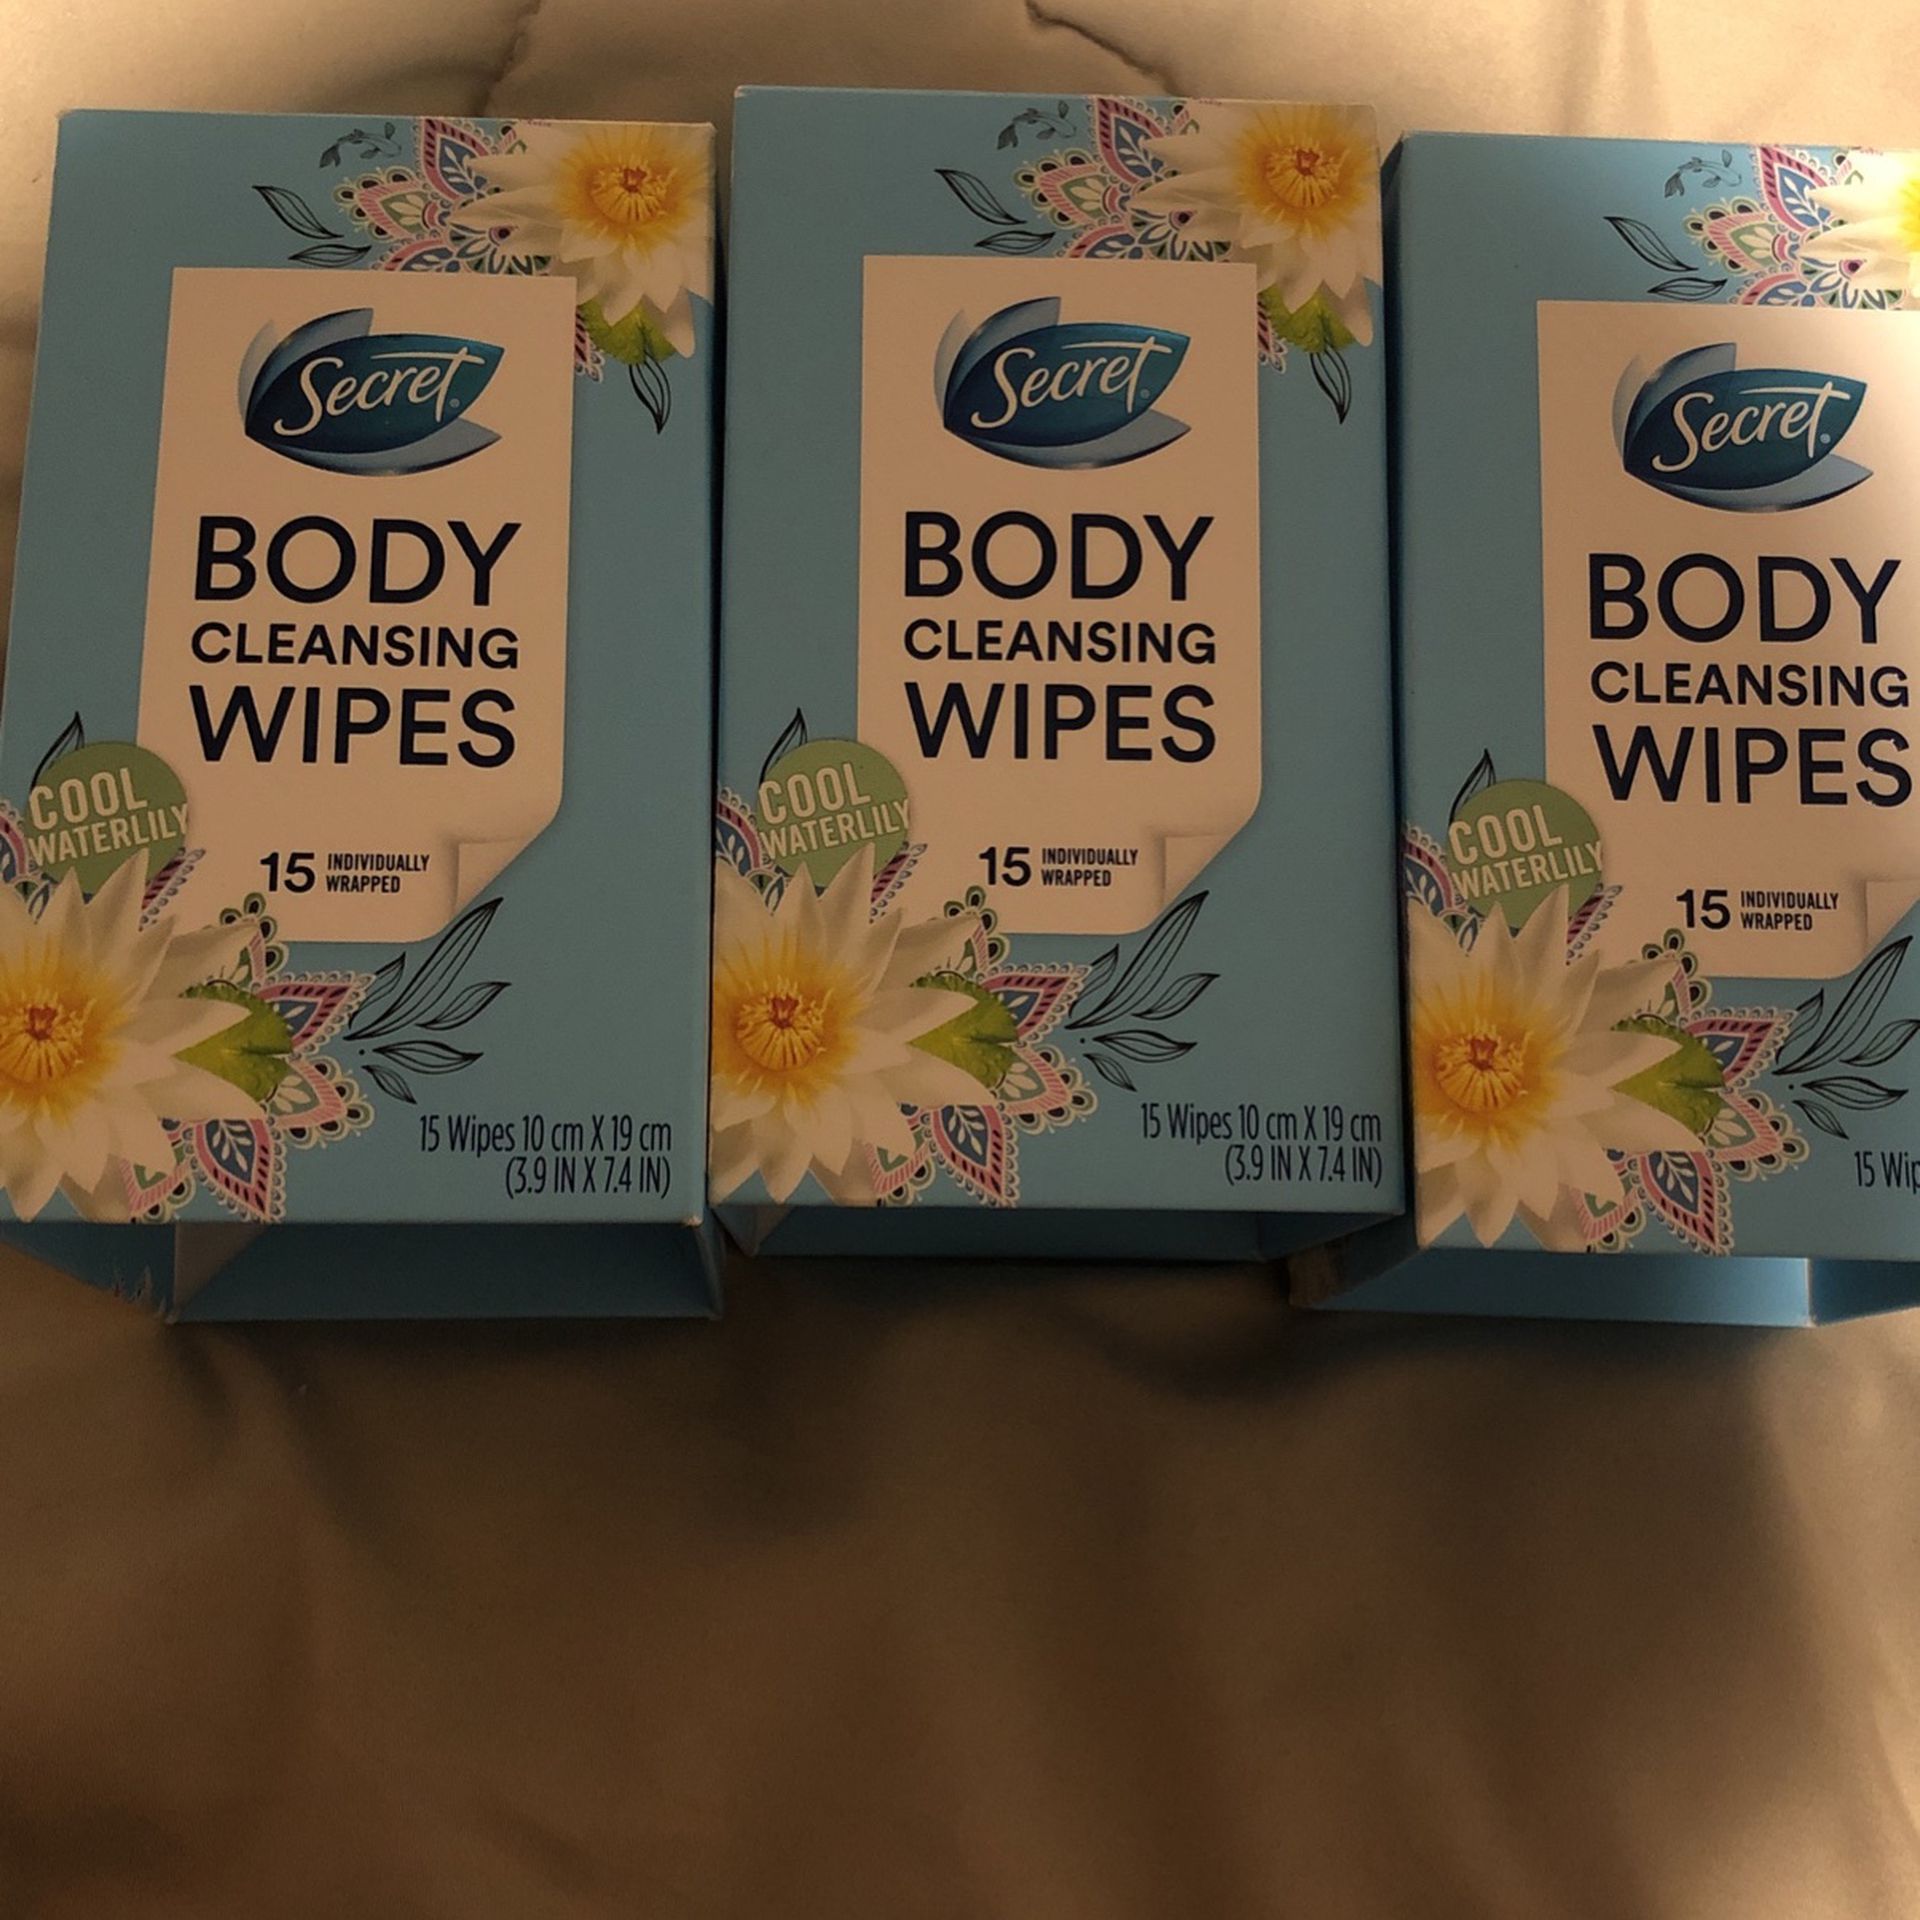 3 Secret Body Cleansing Wipes